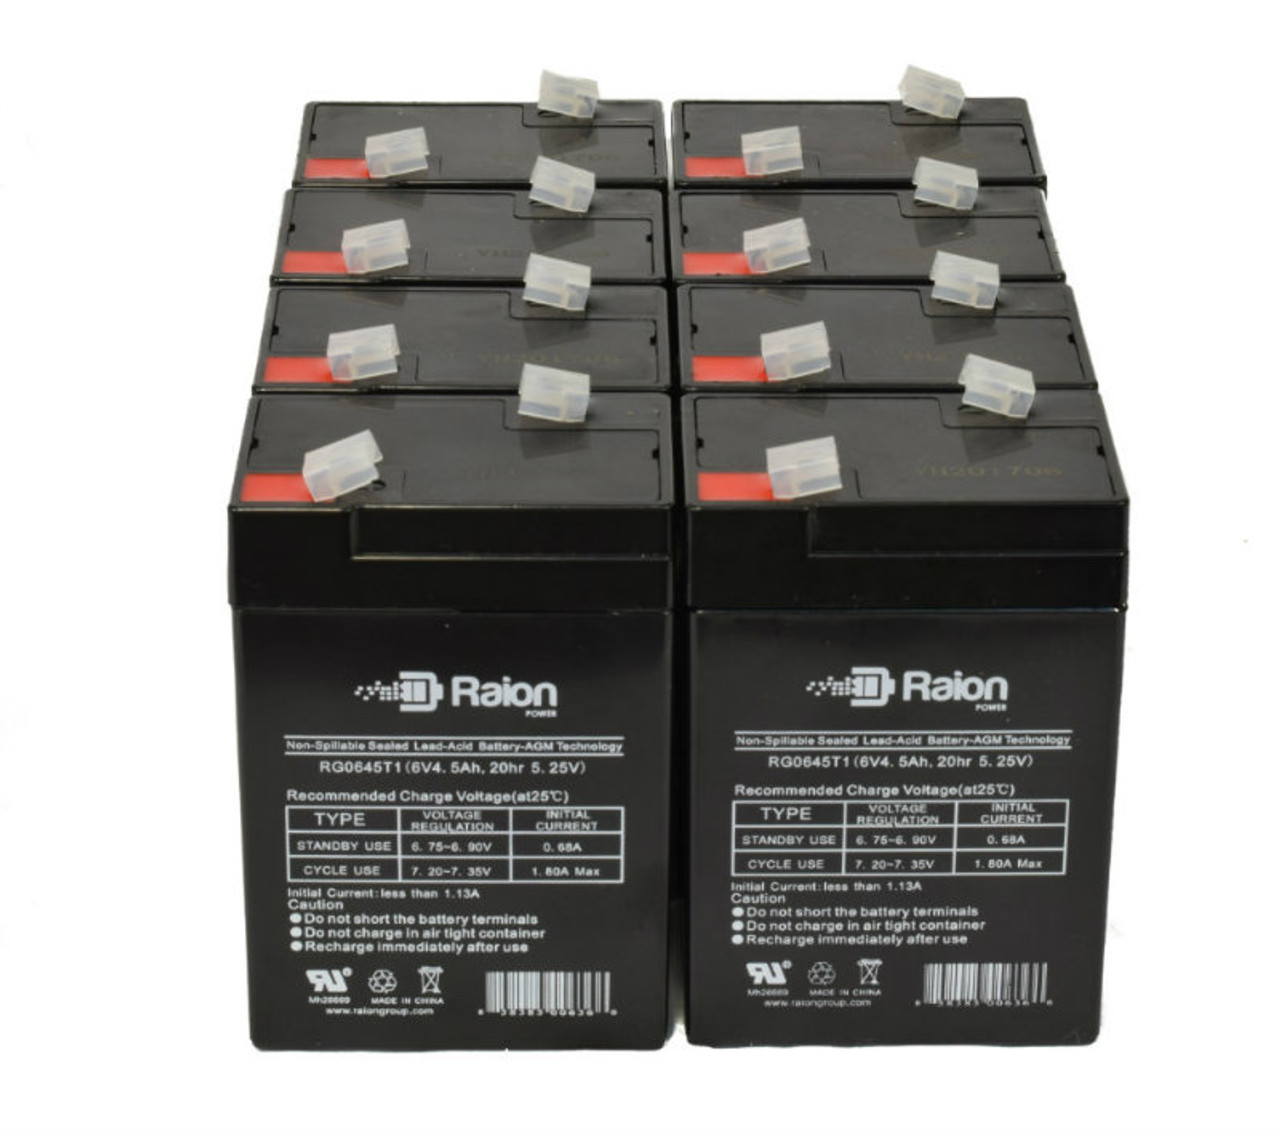 Raion Power 6 Volt 4.5Ah RG0645T1 Replacement Battery for Crown 6CE5 - 8 Pack